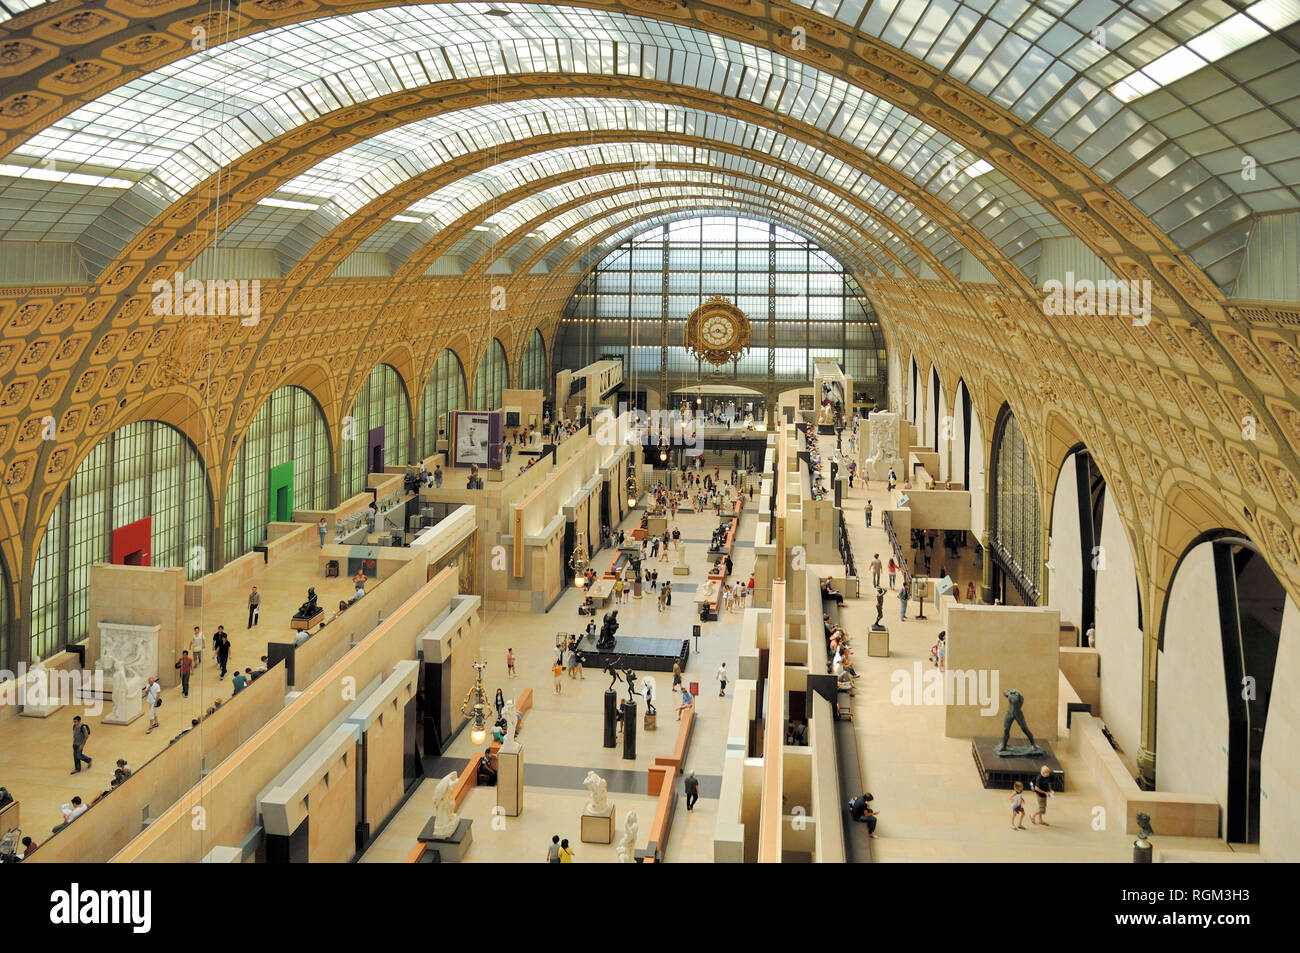 Musee D'Orsay, Paris - World Construction Network